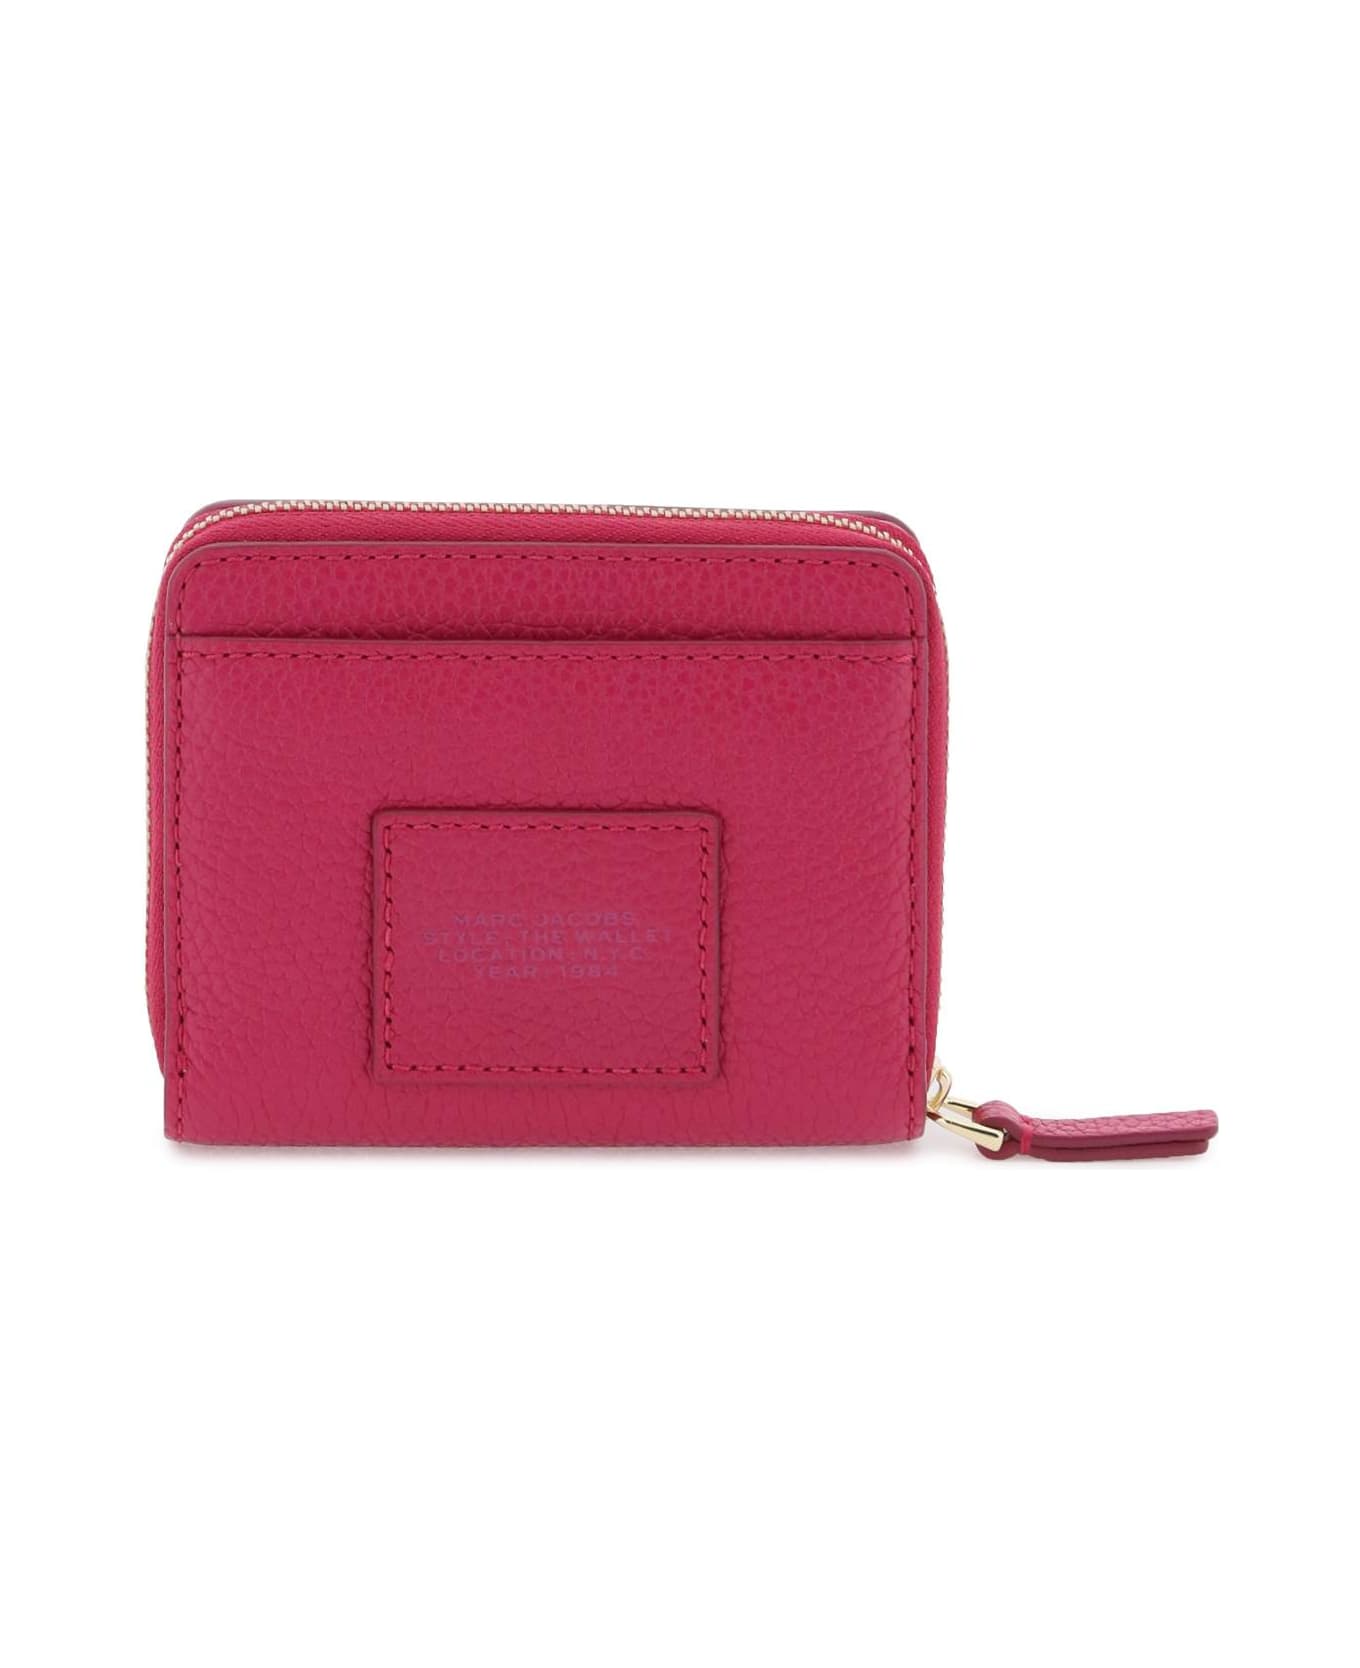 Marc Jacobs Leather Mini Compact Wallet - LIPSTICK PINK (Fuchsia)